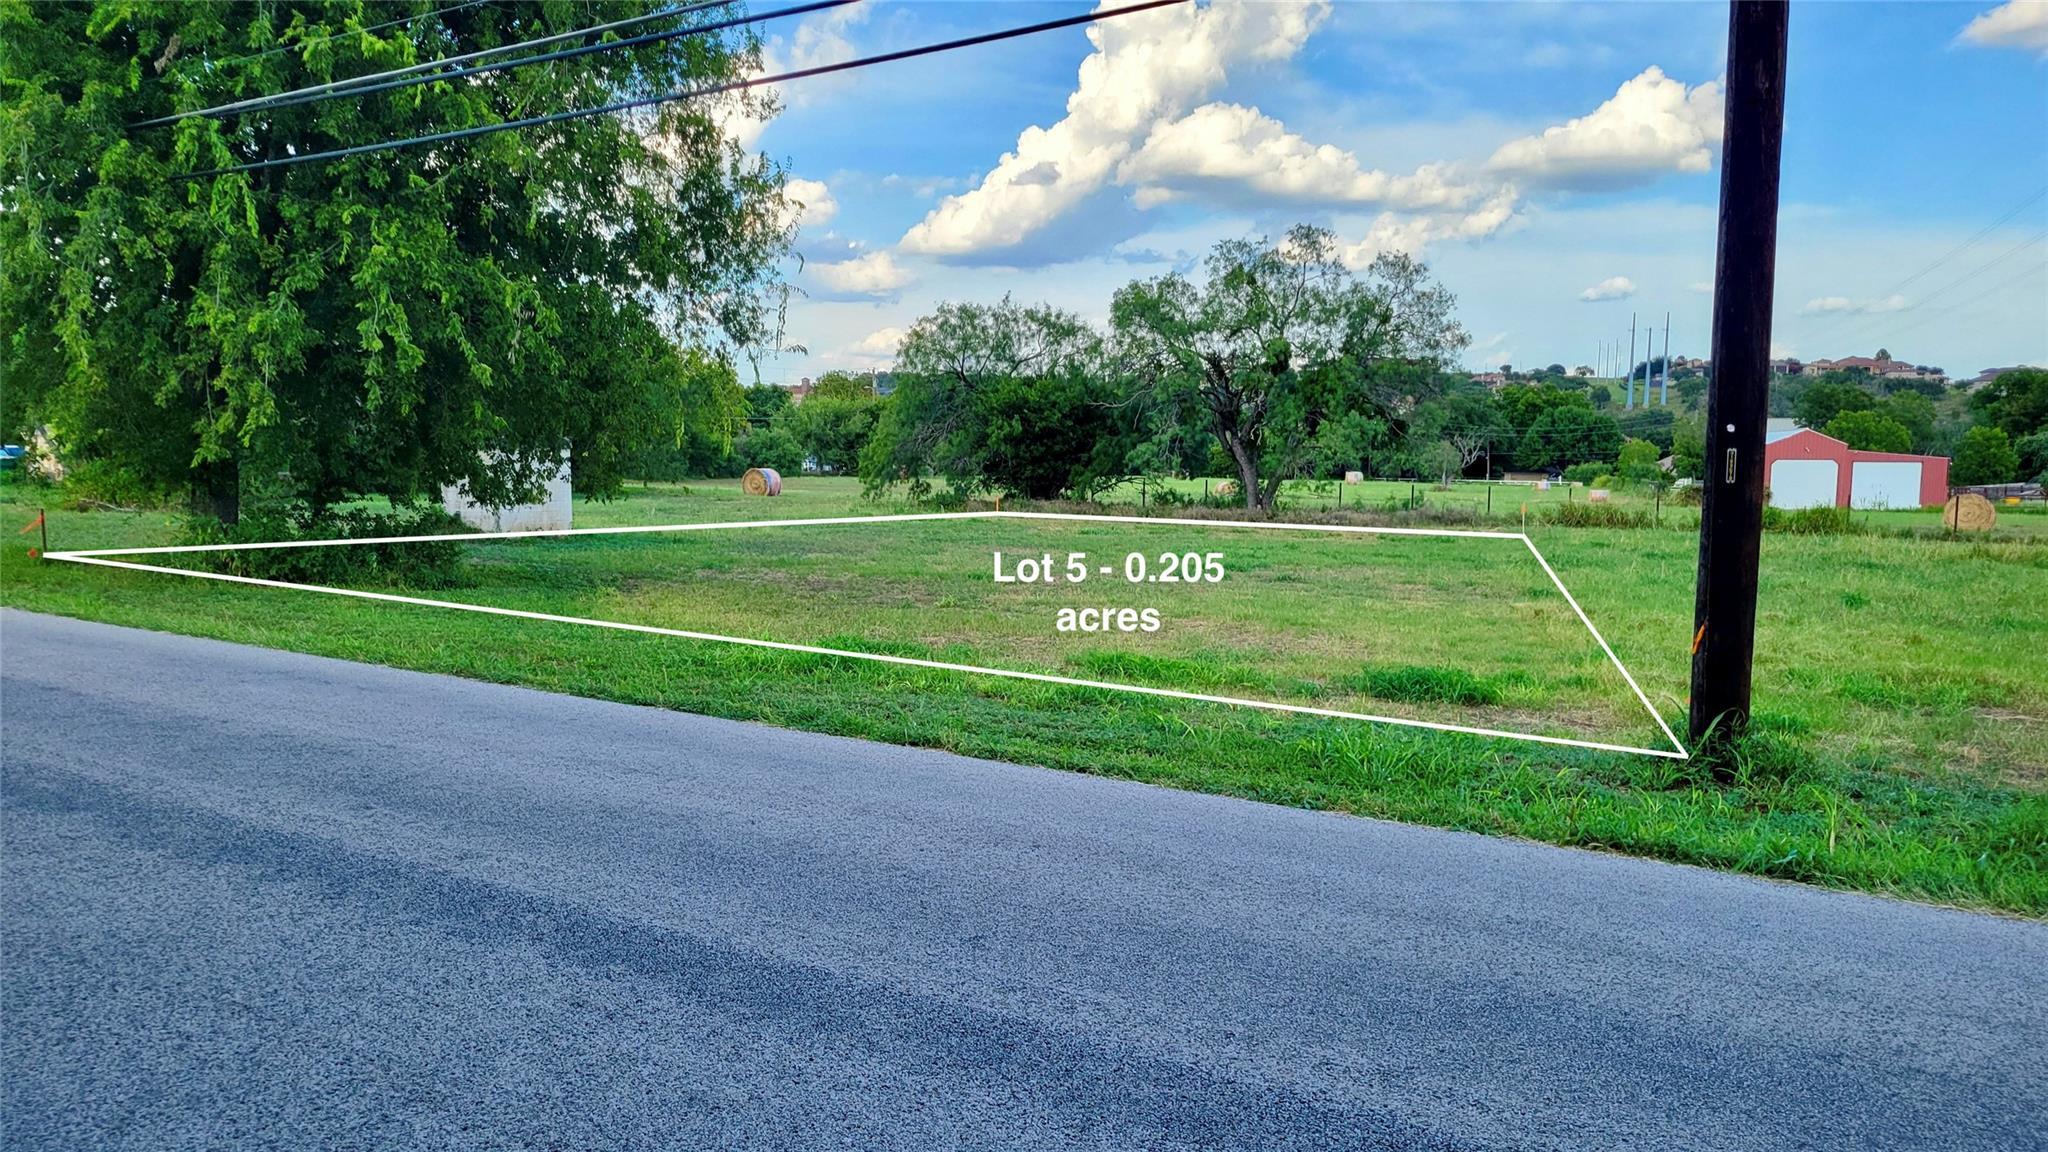 Lot 5, Pecan Valley, 3155216, Marble Falls, Lot,  for sale, Christopher  Machuca, StepStone Realty, LLC